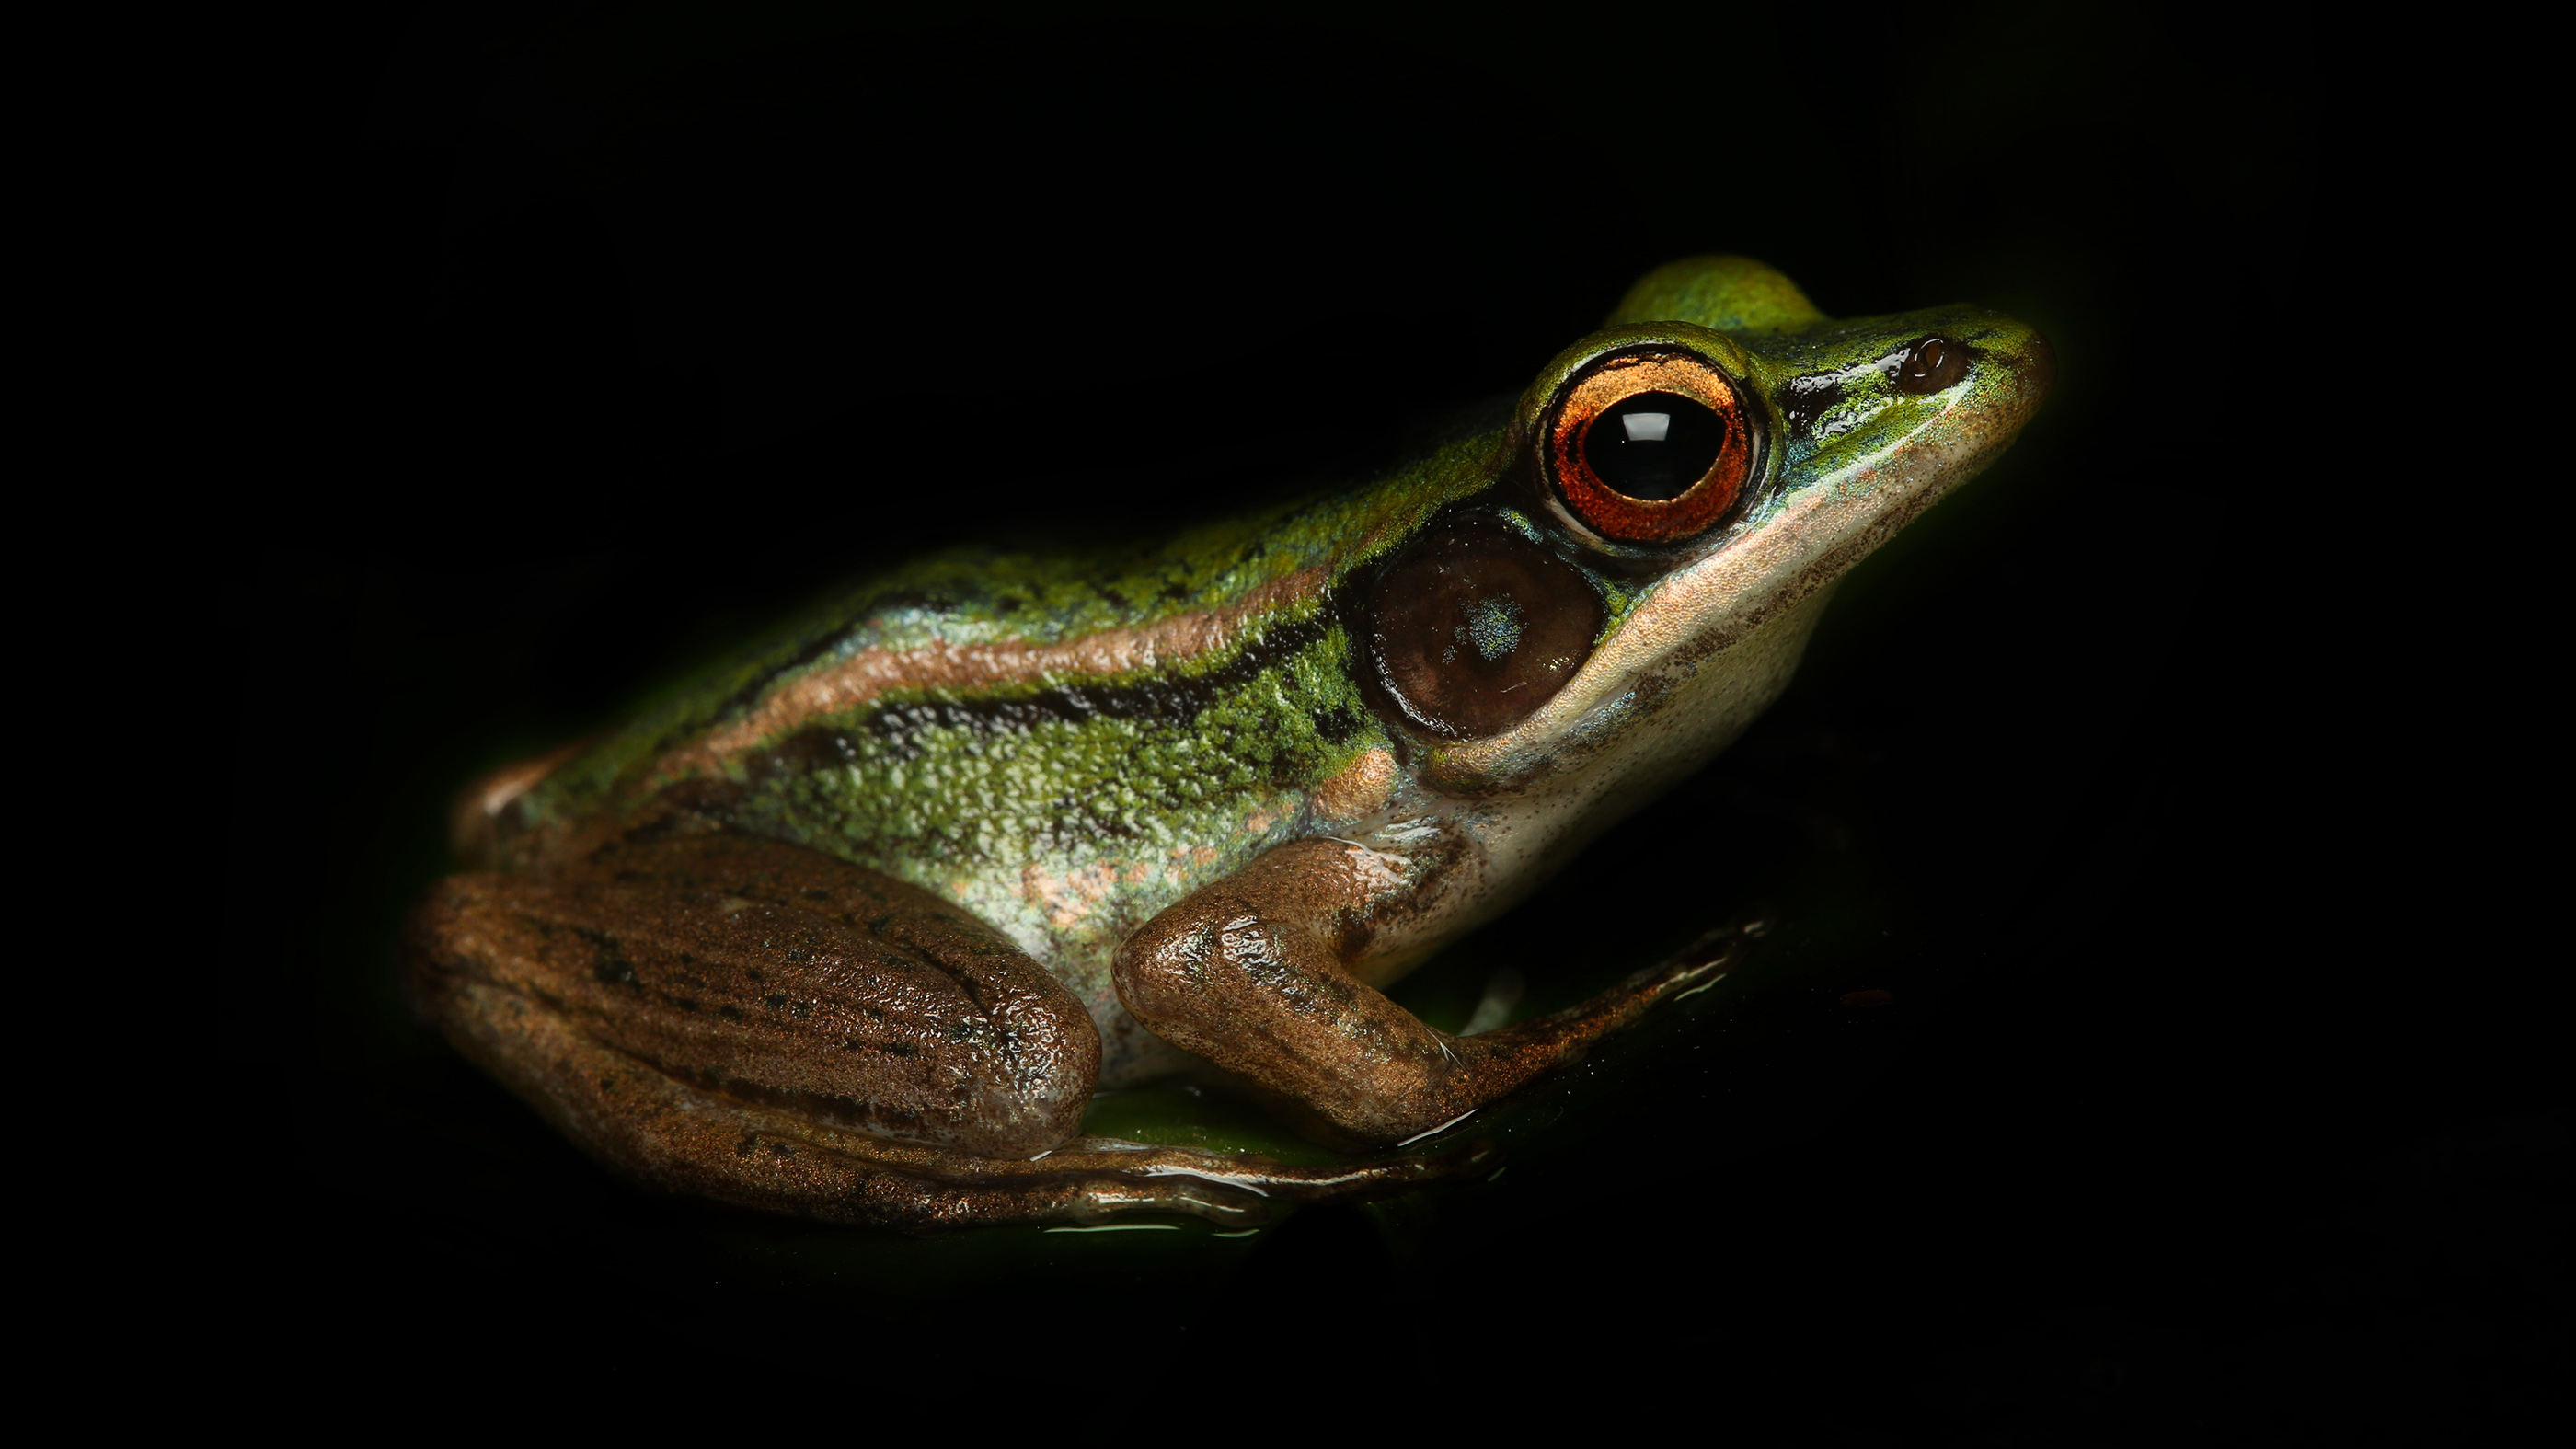 The common green frog (Hylarana erythraea) is a true frog in the family Ranidae.  He lives in Southeast Asia.